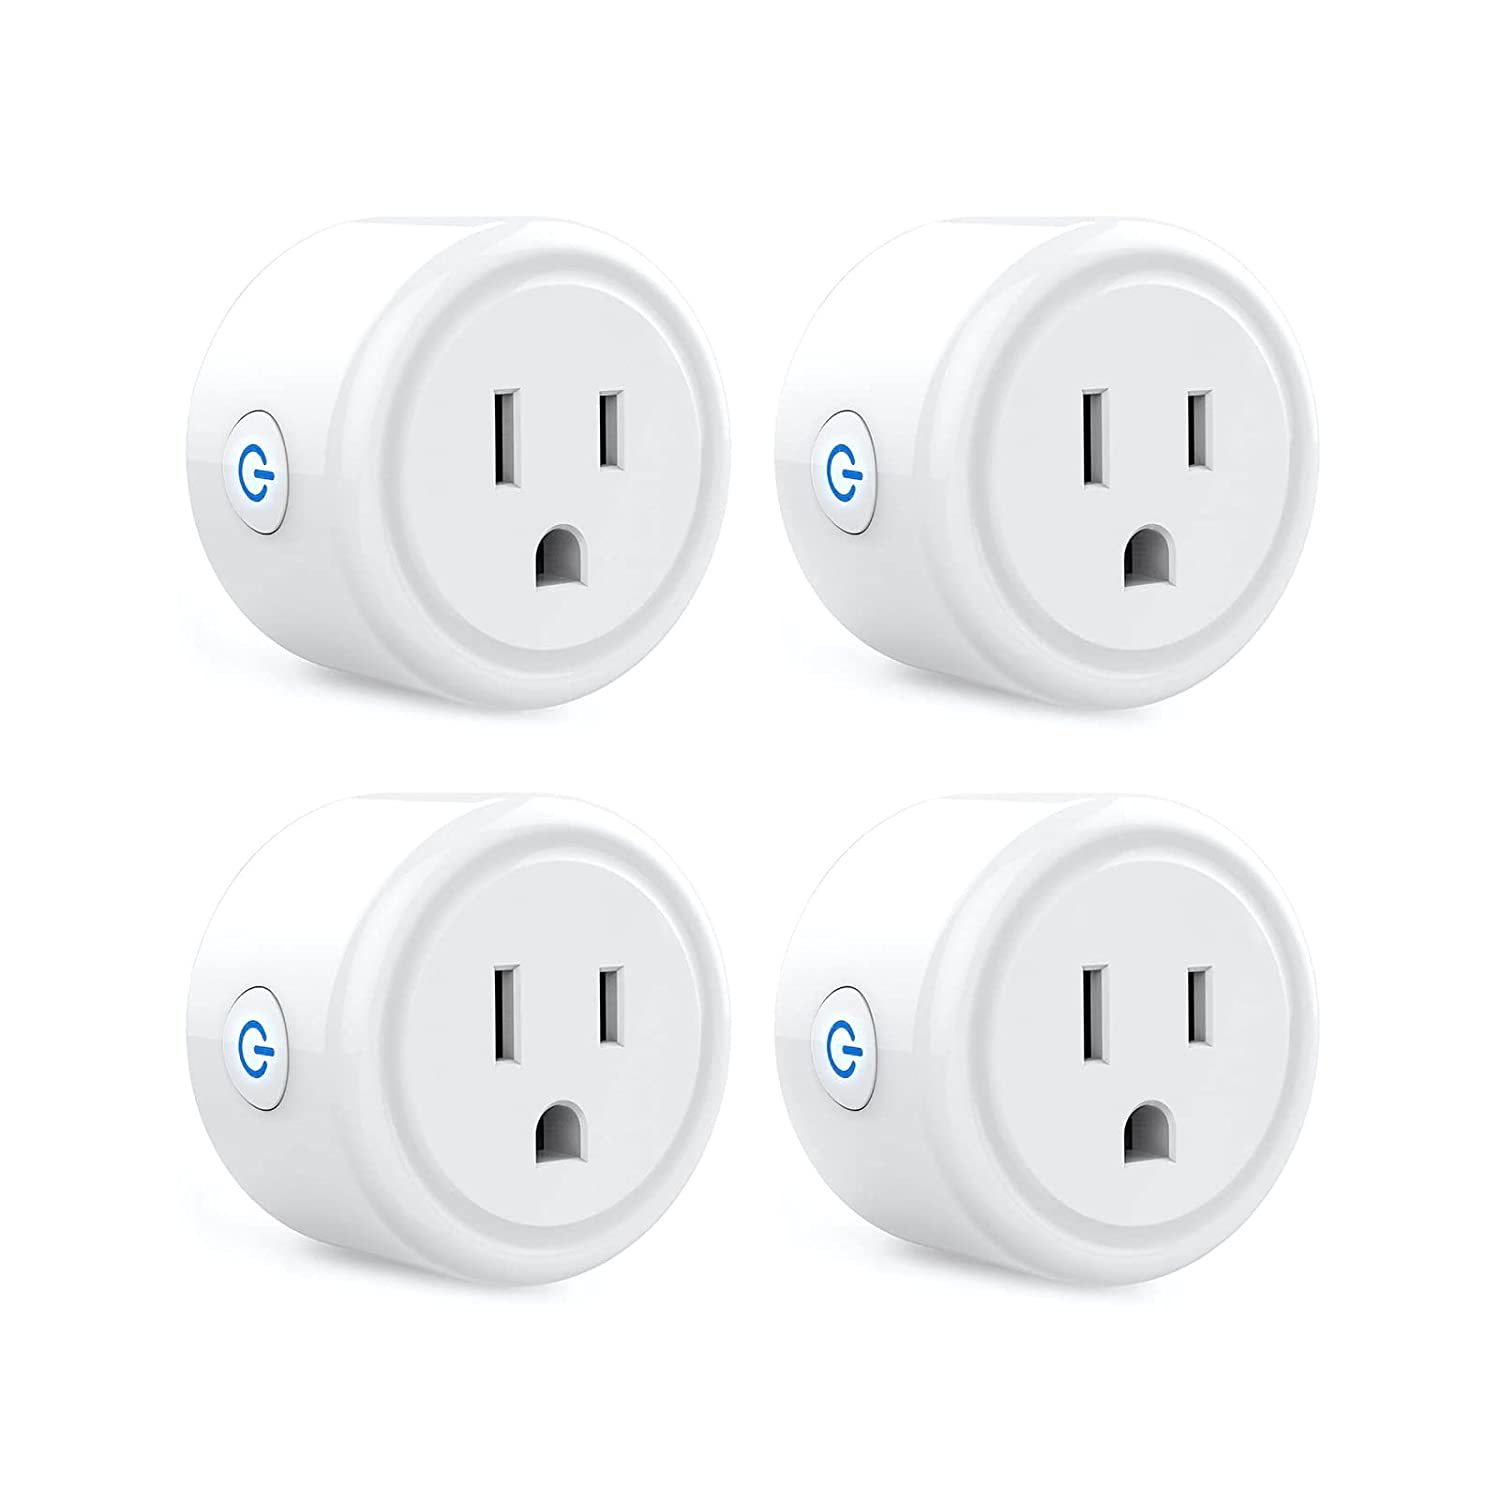 Minoston Outdoor Smart Plug WiFi Outlet Heavy Duty Plug-In Outlet, Remote Control, Waterproof, Compatible with Alexa Google Assistant, No Hub